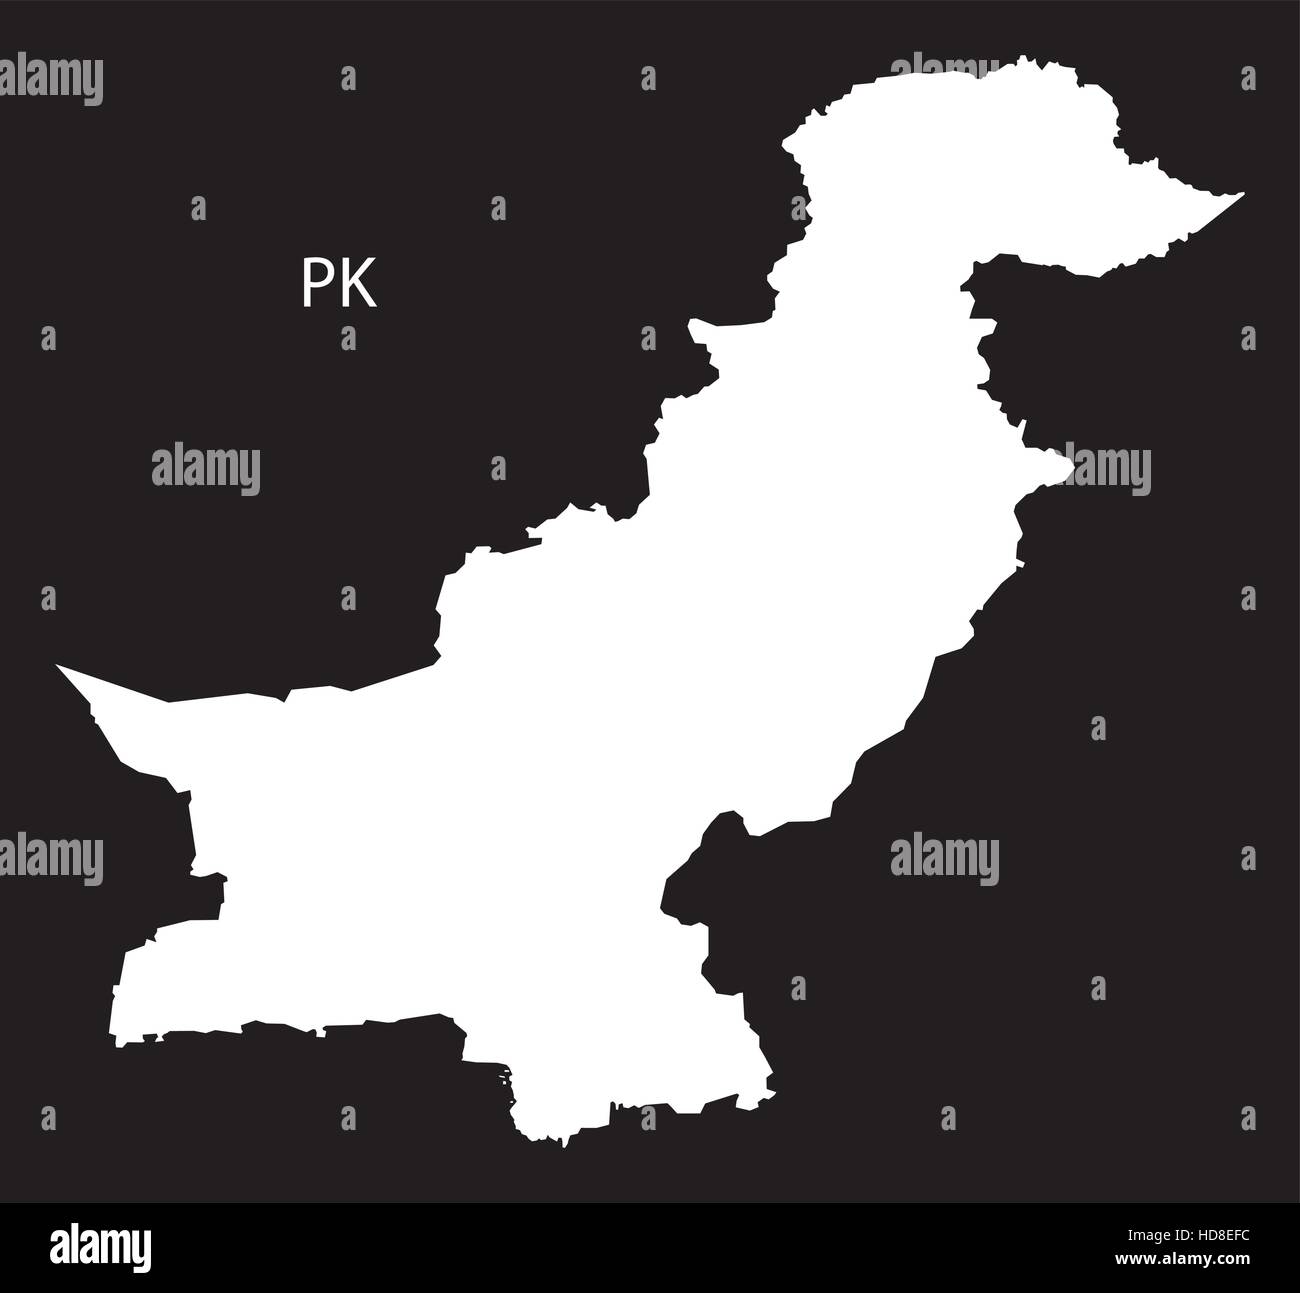 Pakistan Map black and white illustration Stock Vector